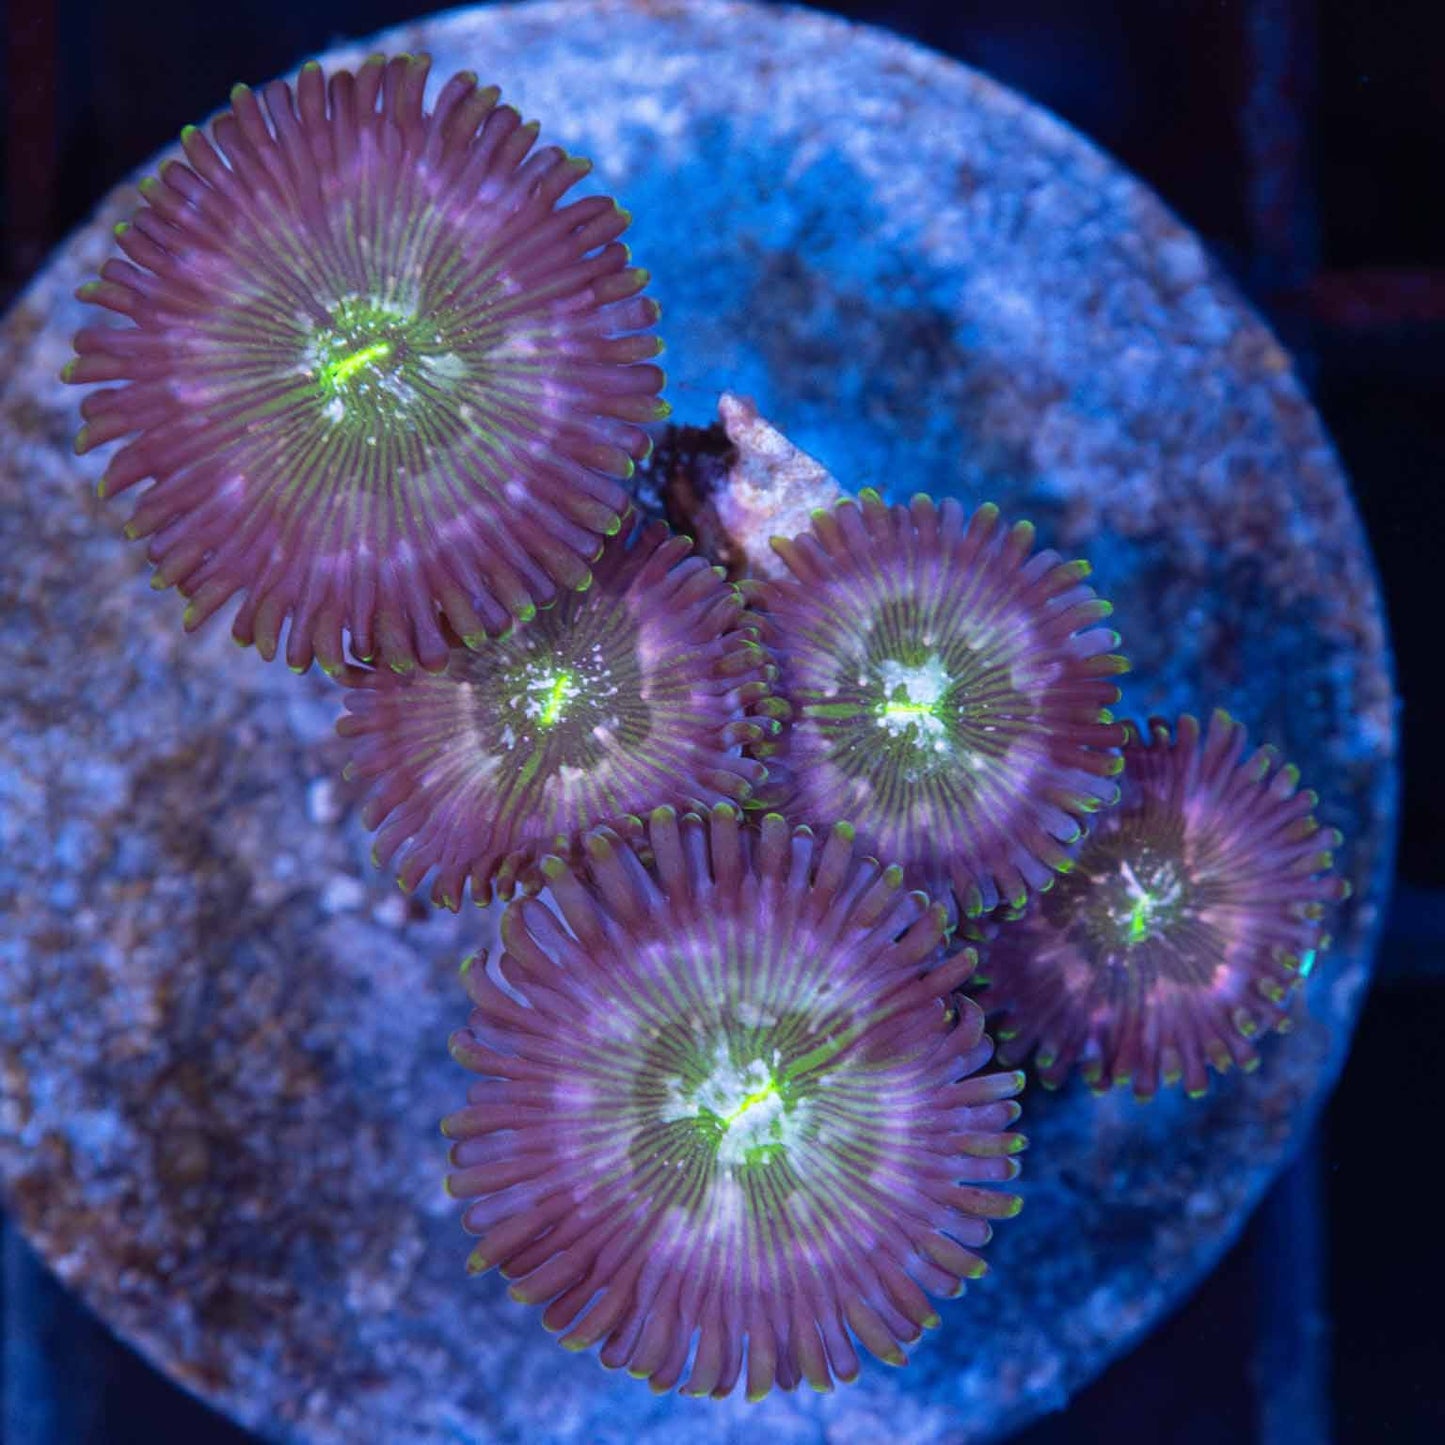 Indo Ultra Zoa on Disc